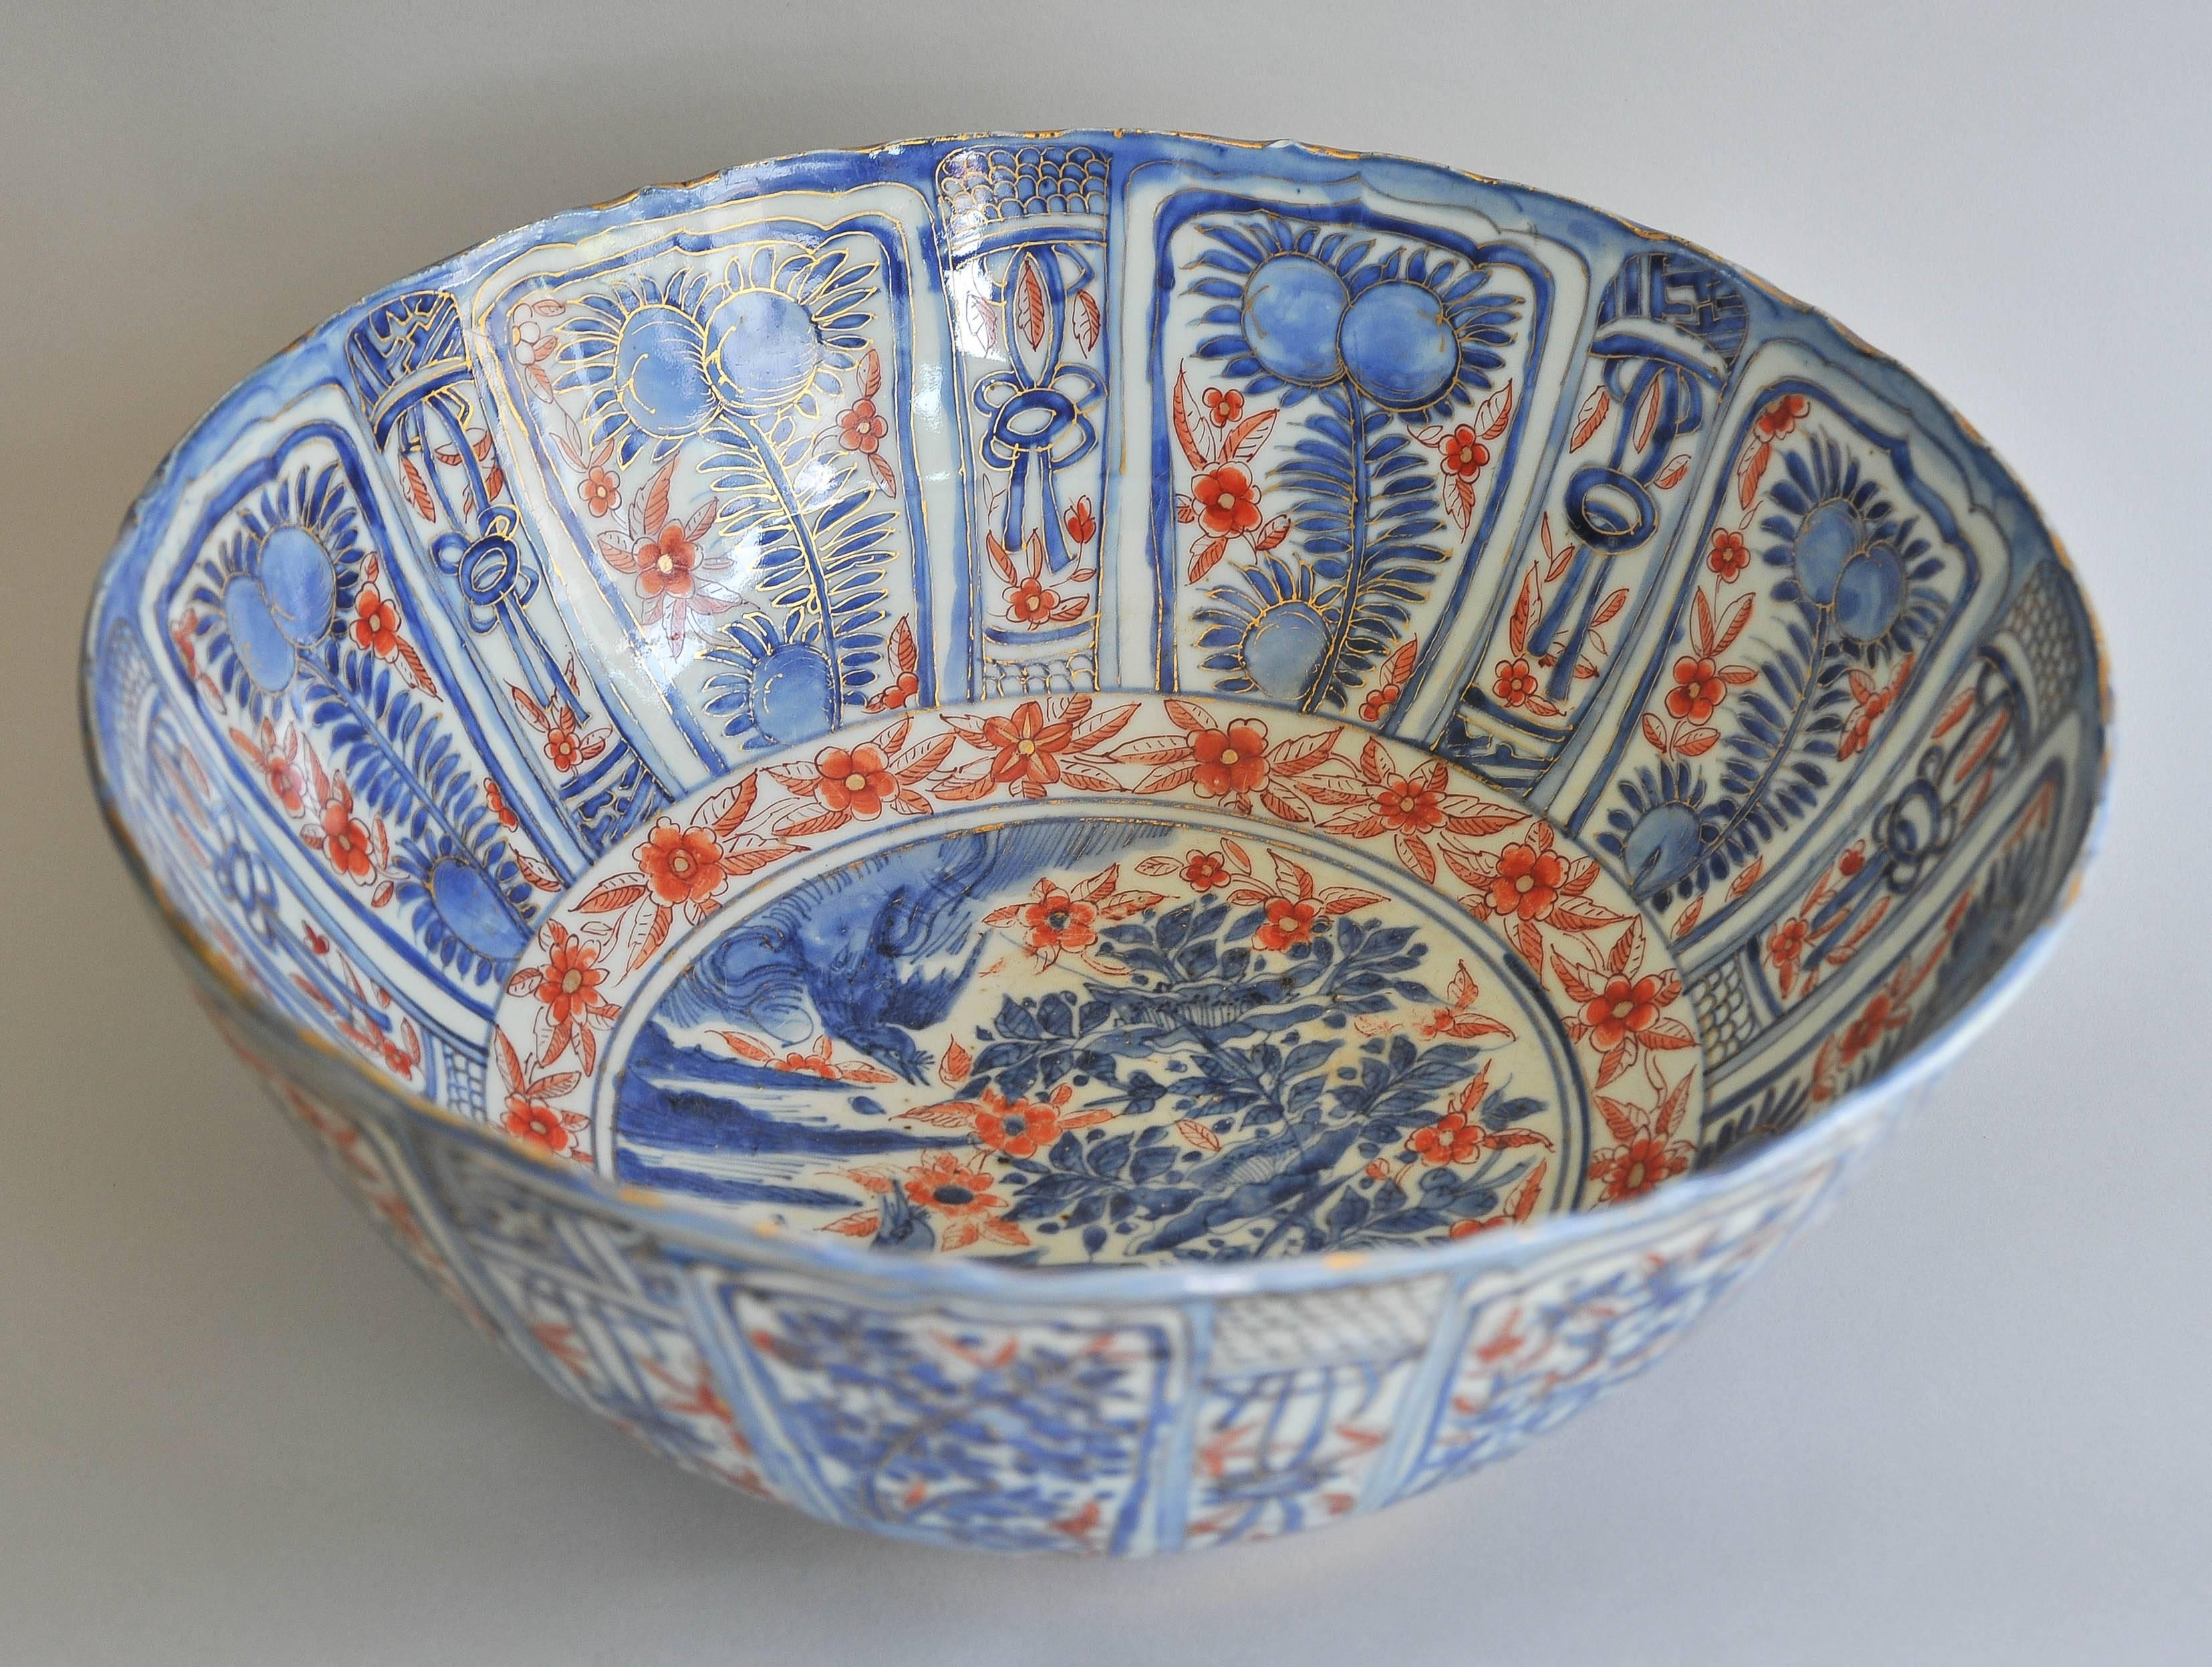 A large Chinese Wanli period (1563-1620) blue and white porcelain bowl in perfect condition depicting several panels with flowers and tree branches and a scene with birds in the center. The bowl has been later highlighted around 1750, possibly in